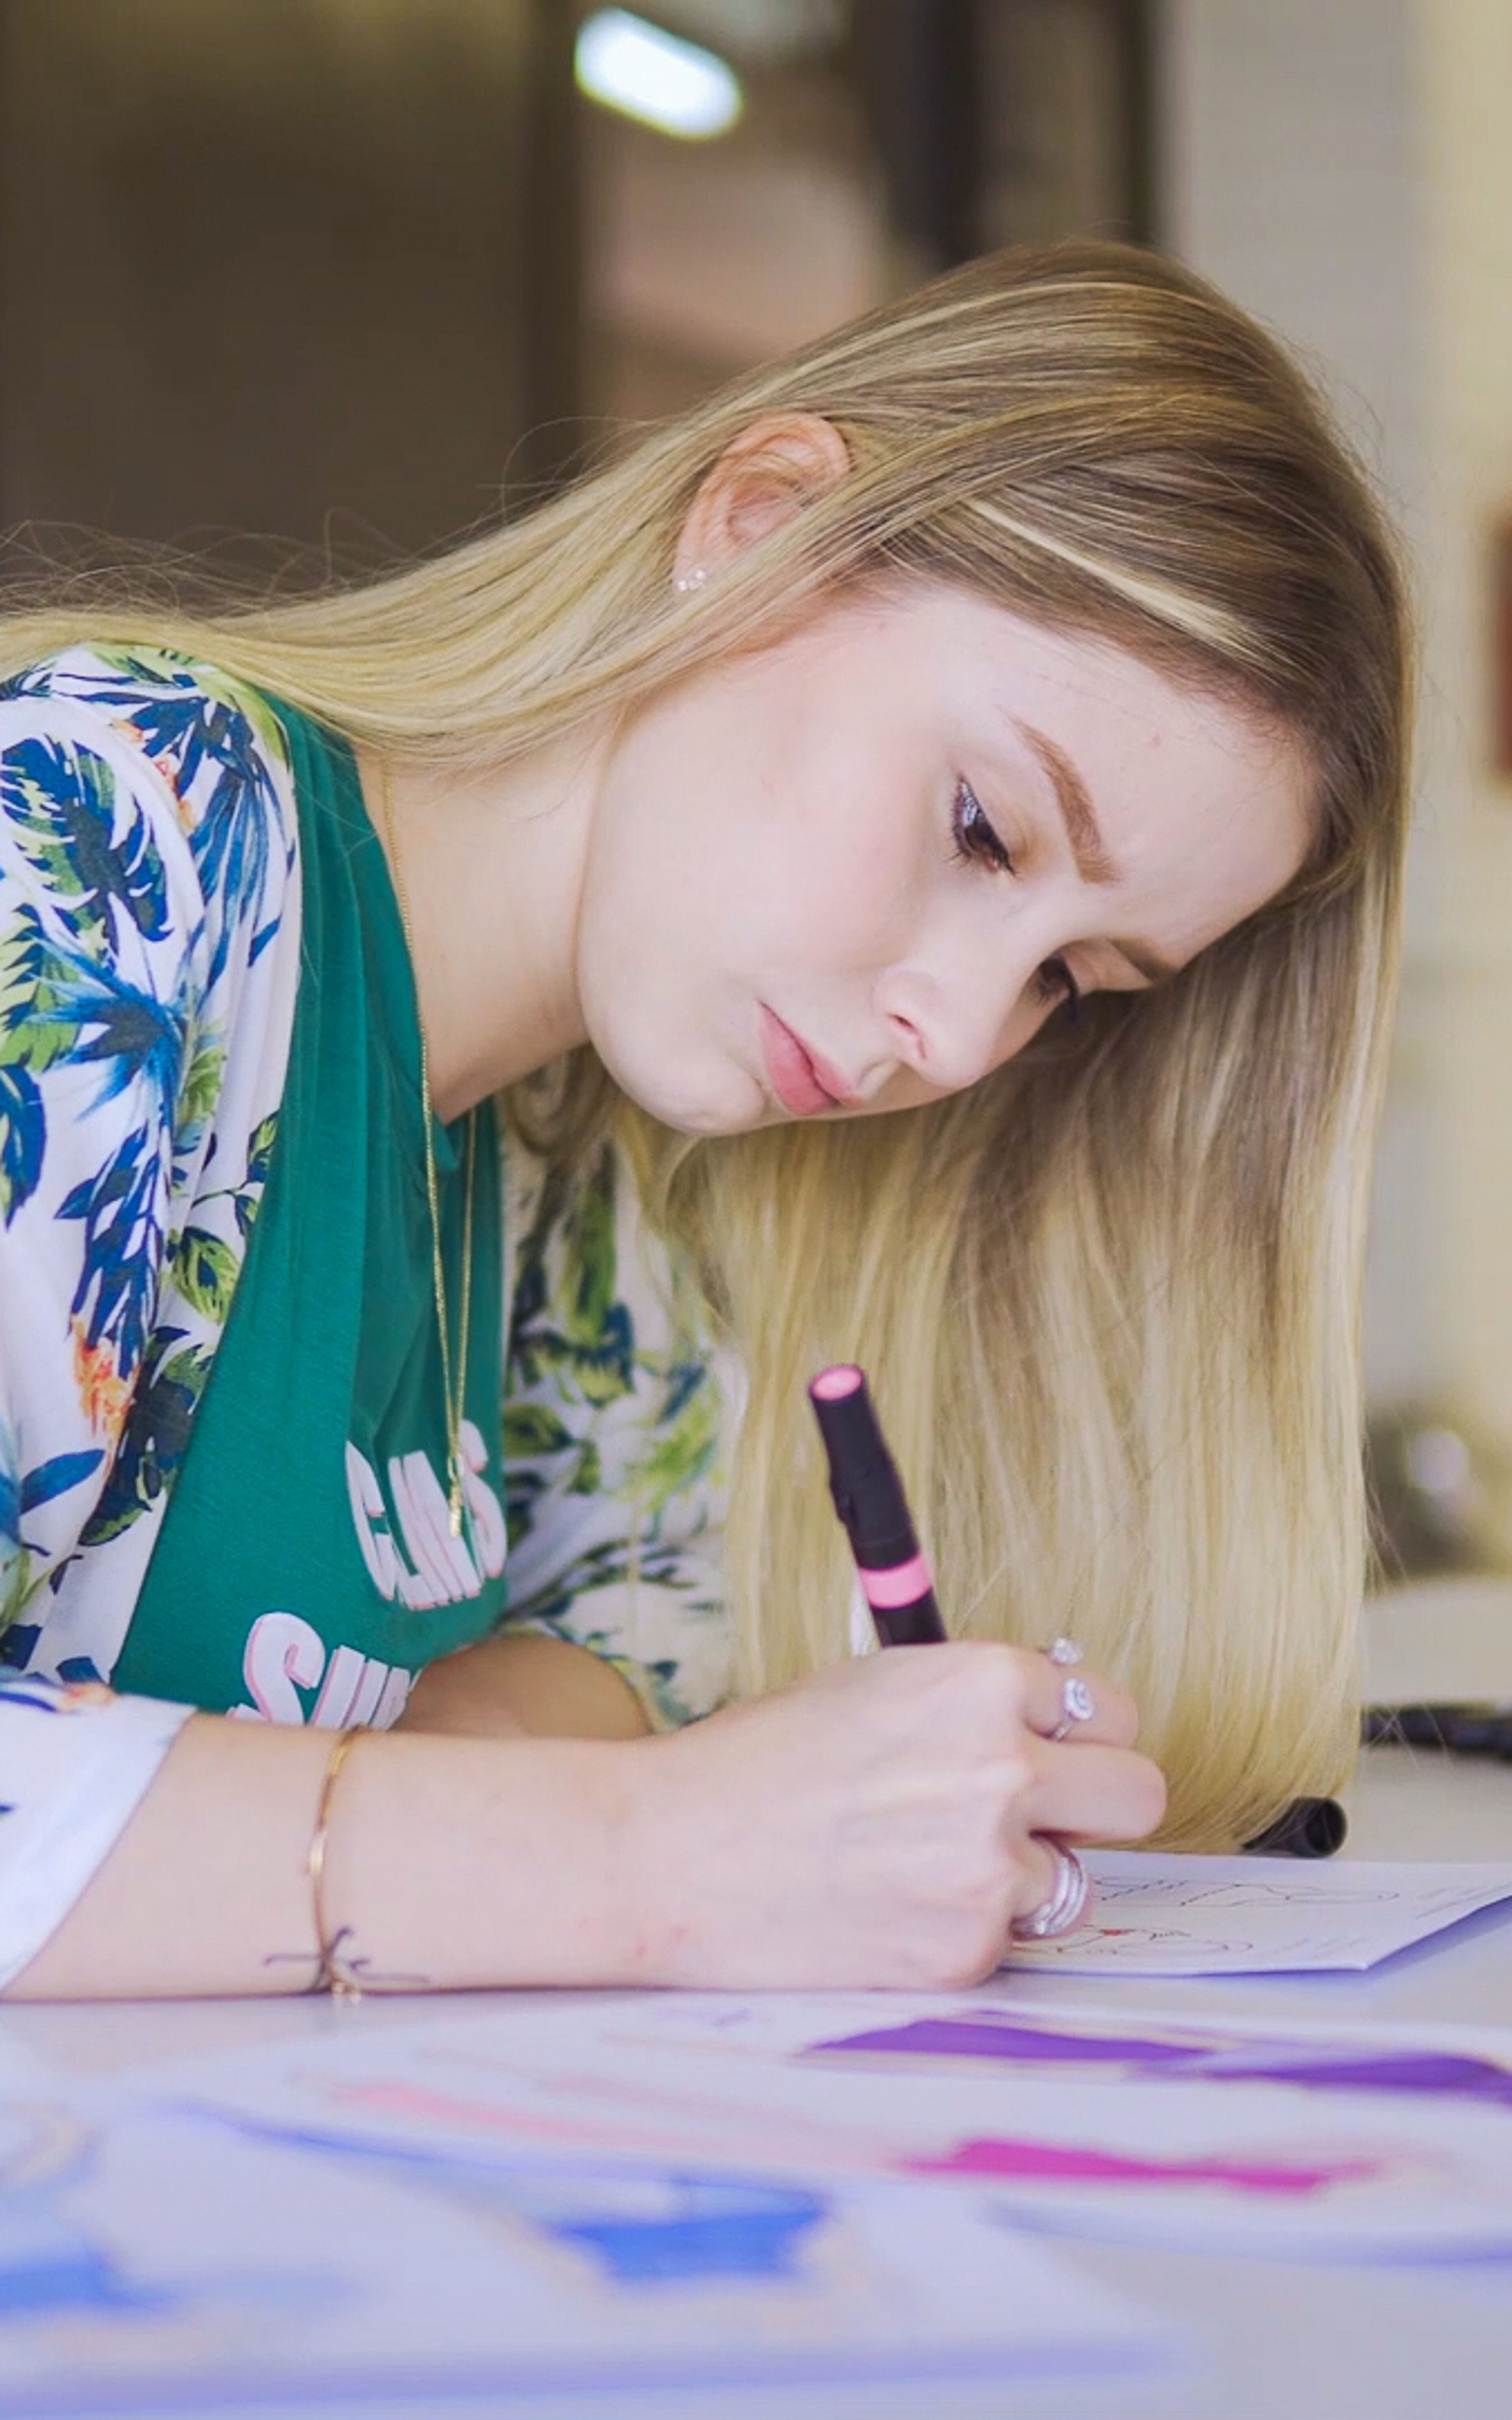 A diligent student immerses herself in sketching designs, a portrait of concentration.